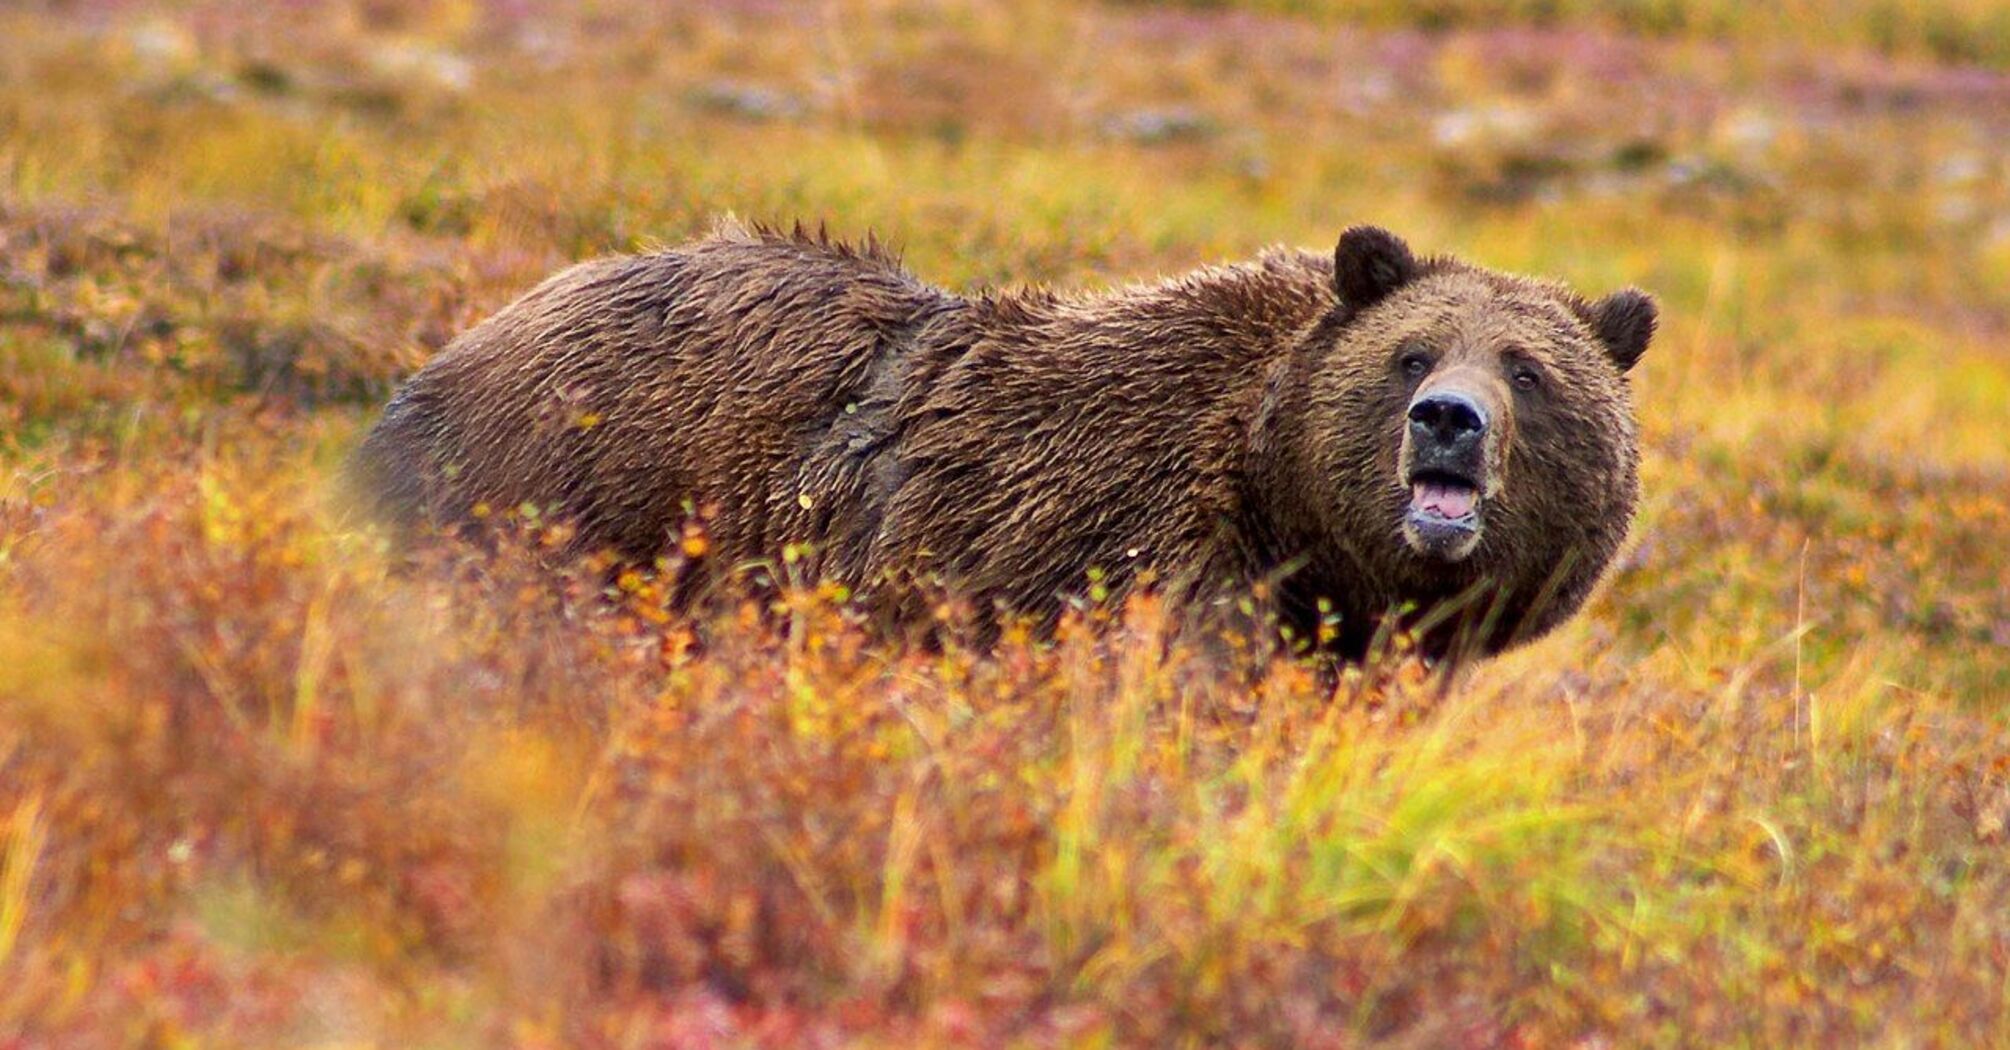 In Yellowstone Park, free walks will be restricted due to grizzly bears